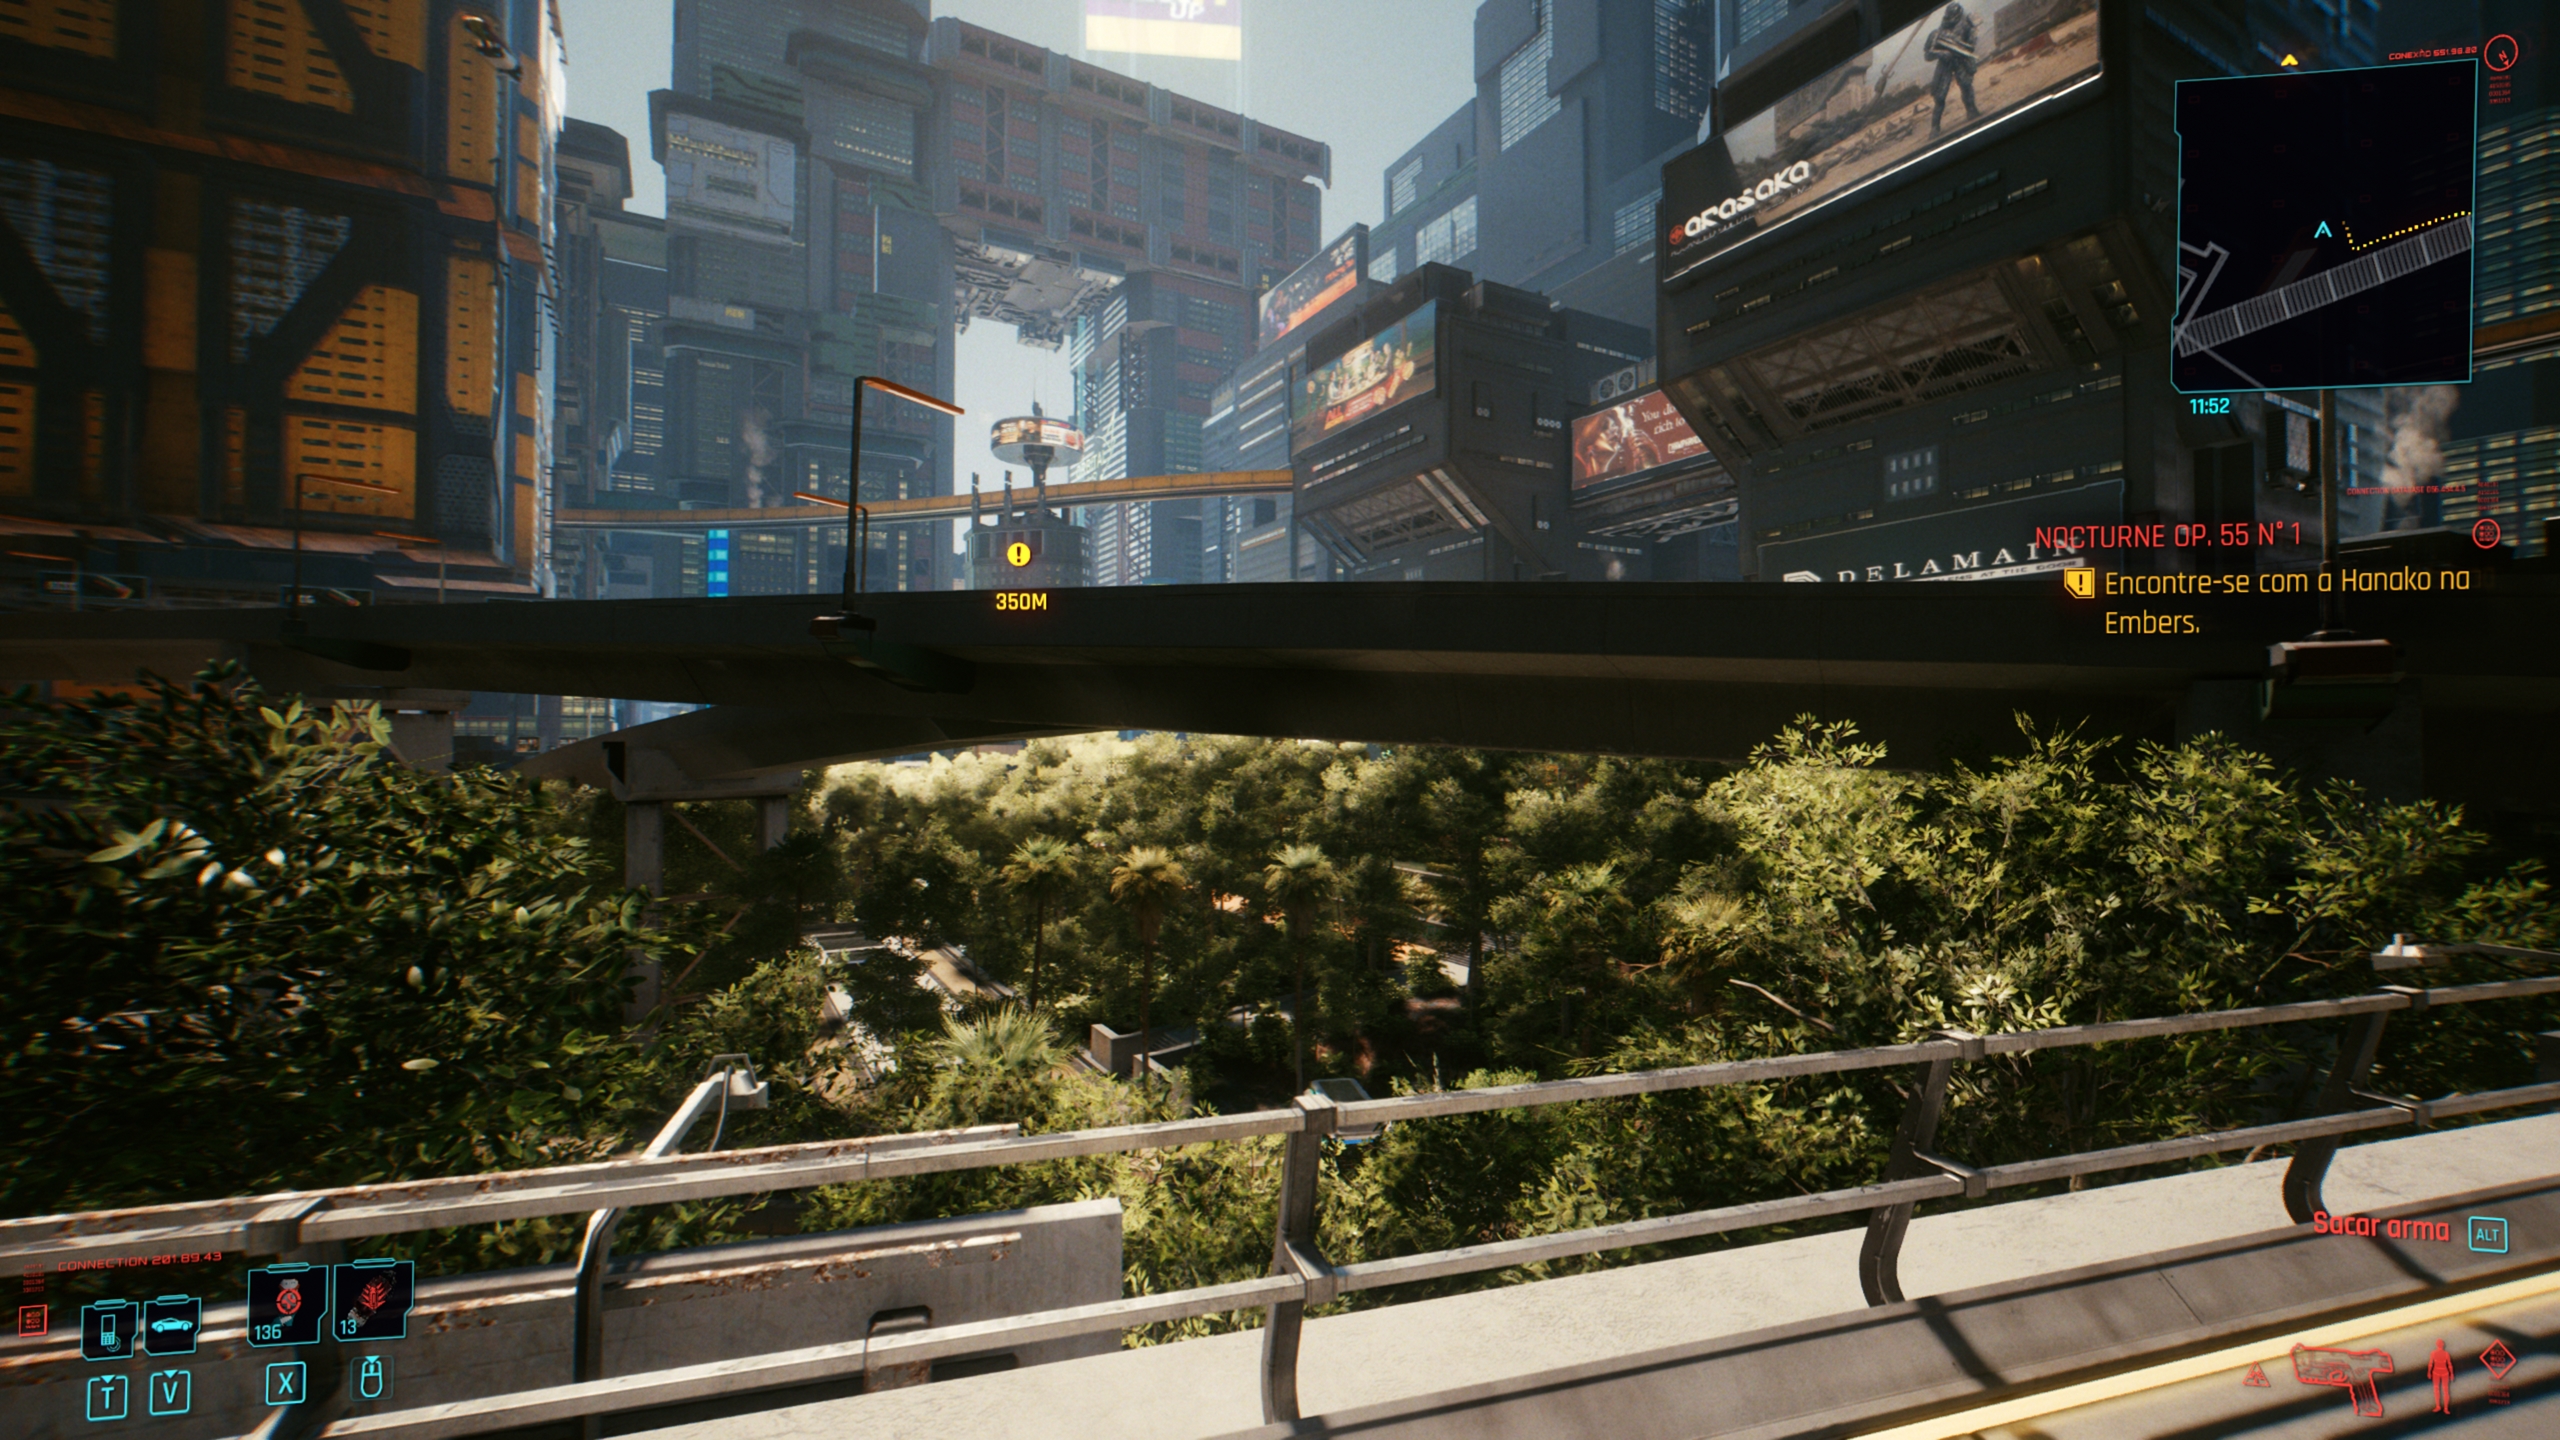 Review: Cyberpunk 2077 does not revolutionize, but improves everything to the point